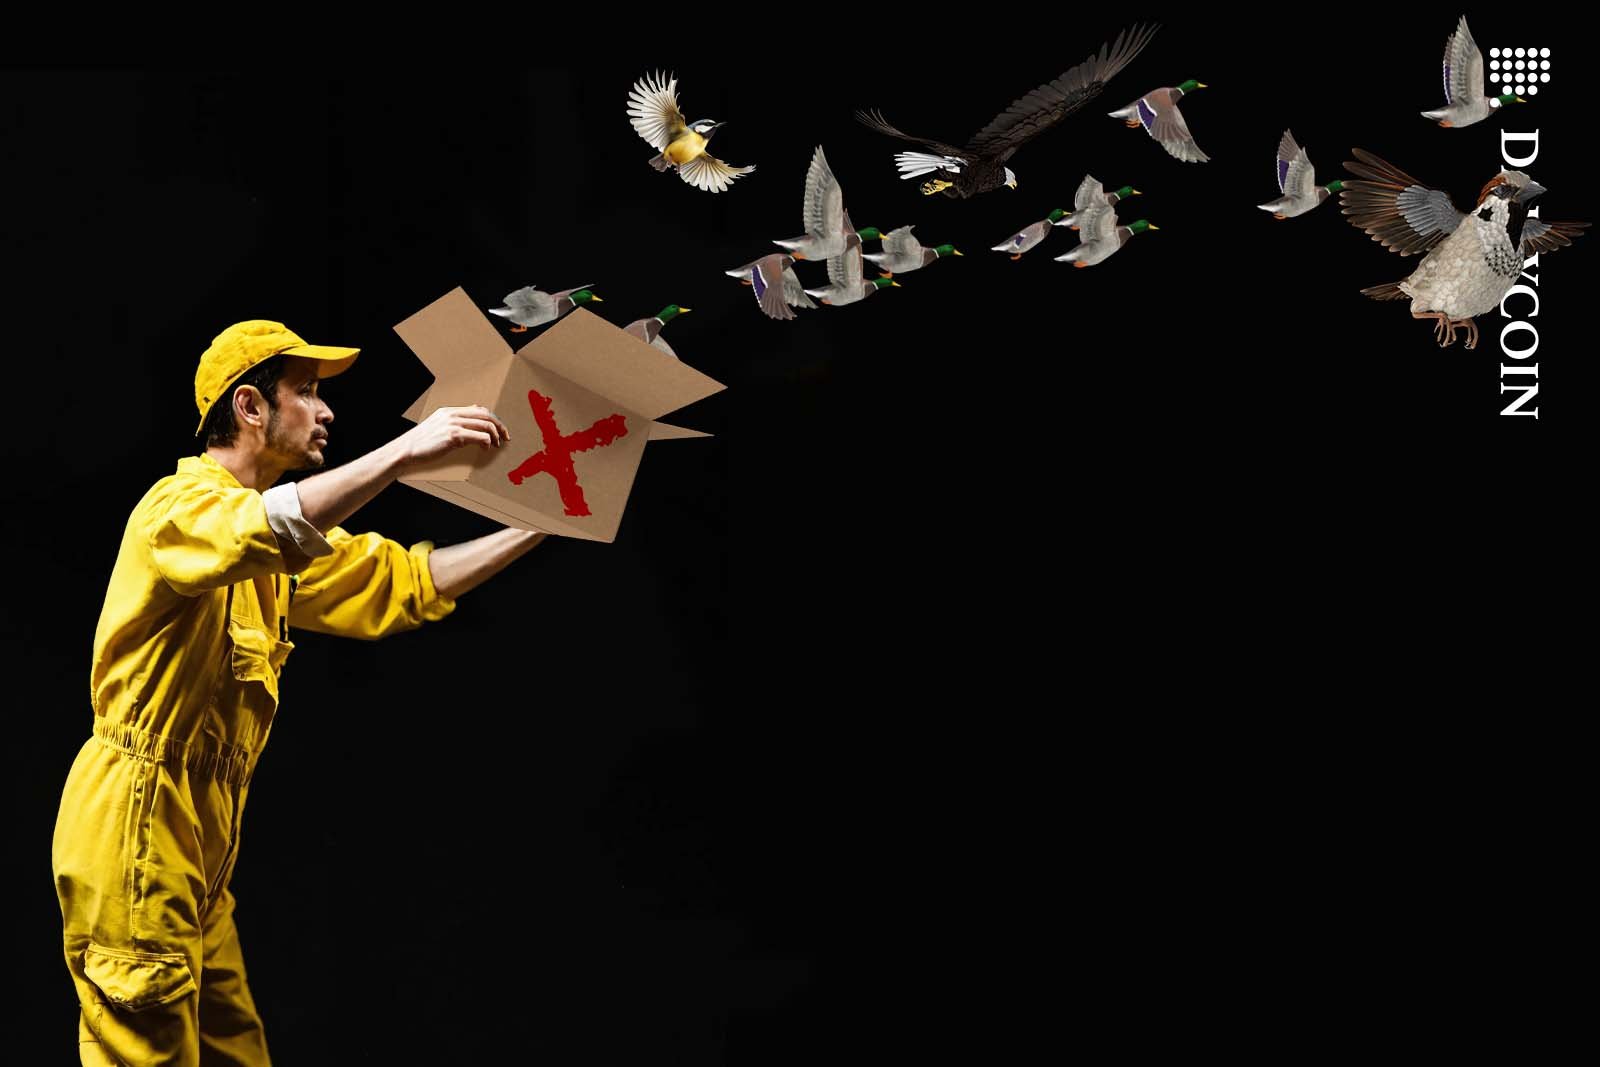 Man in yellow jumpsuit releasing birds from a cardboard box.